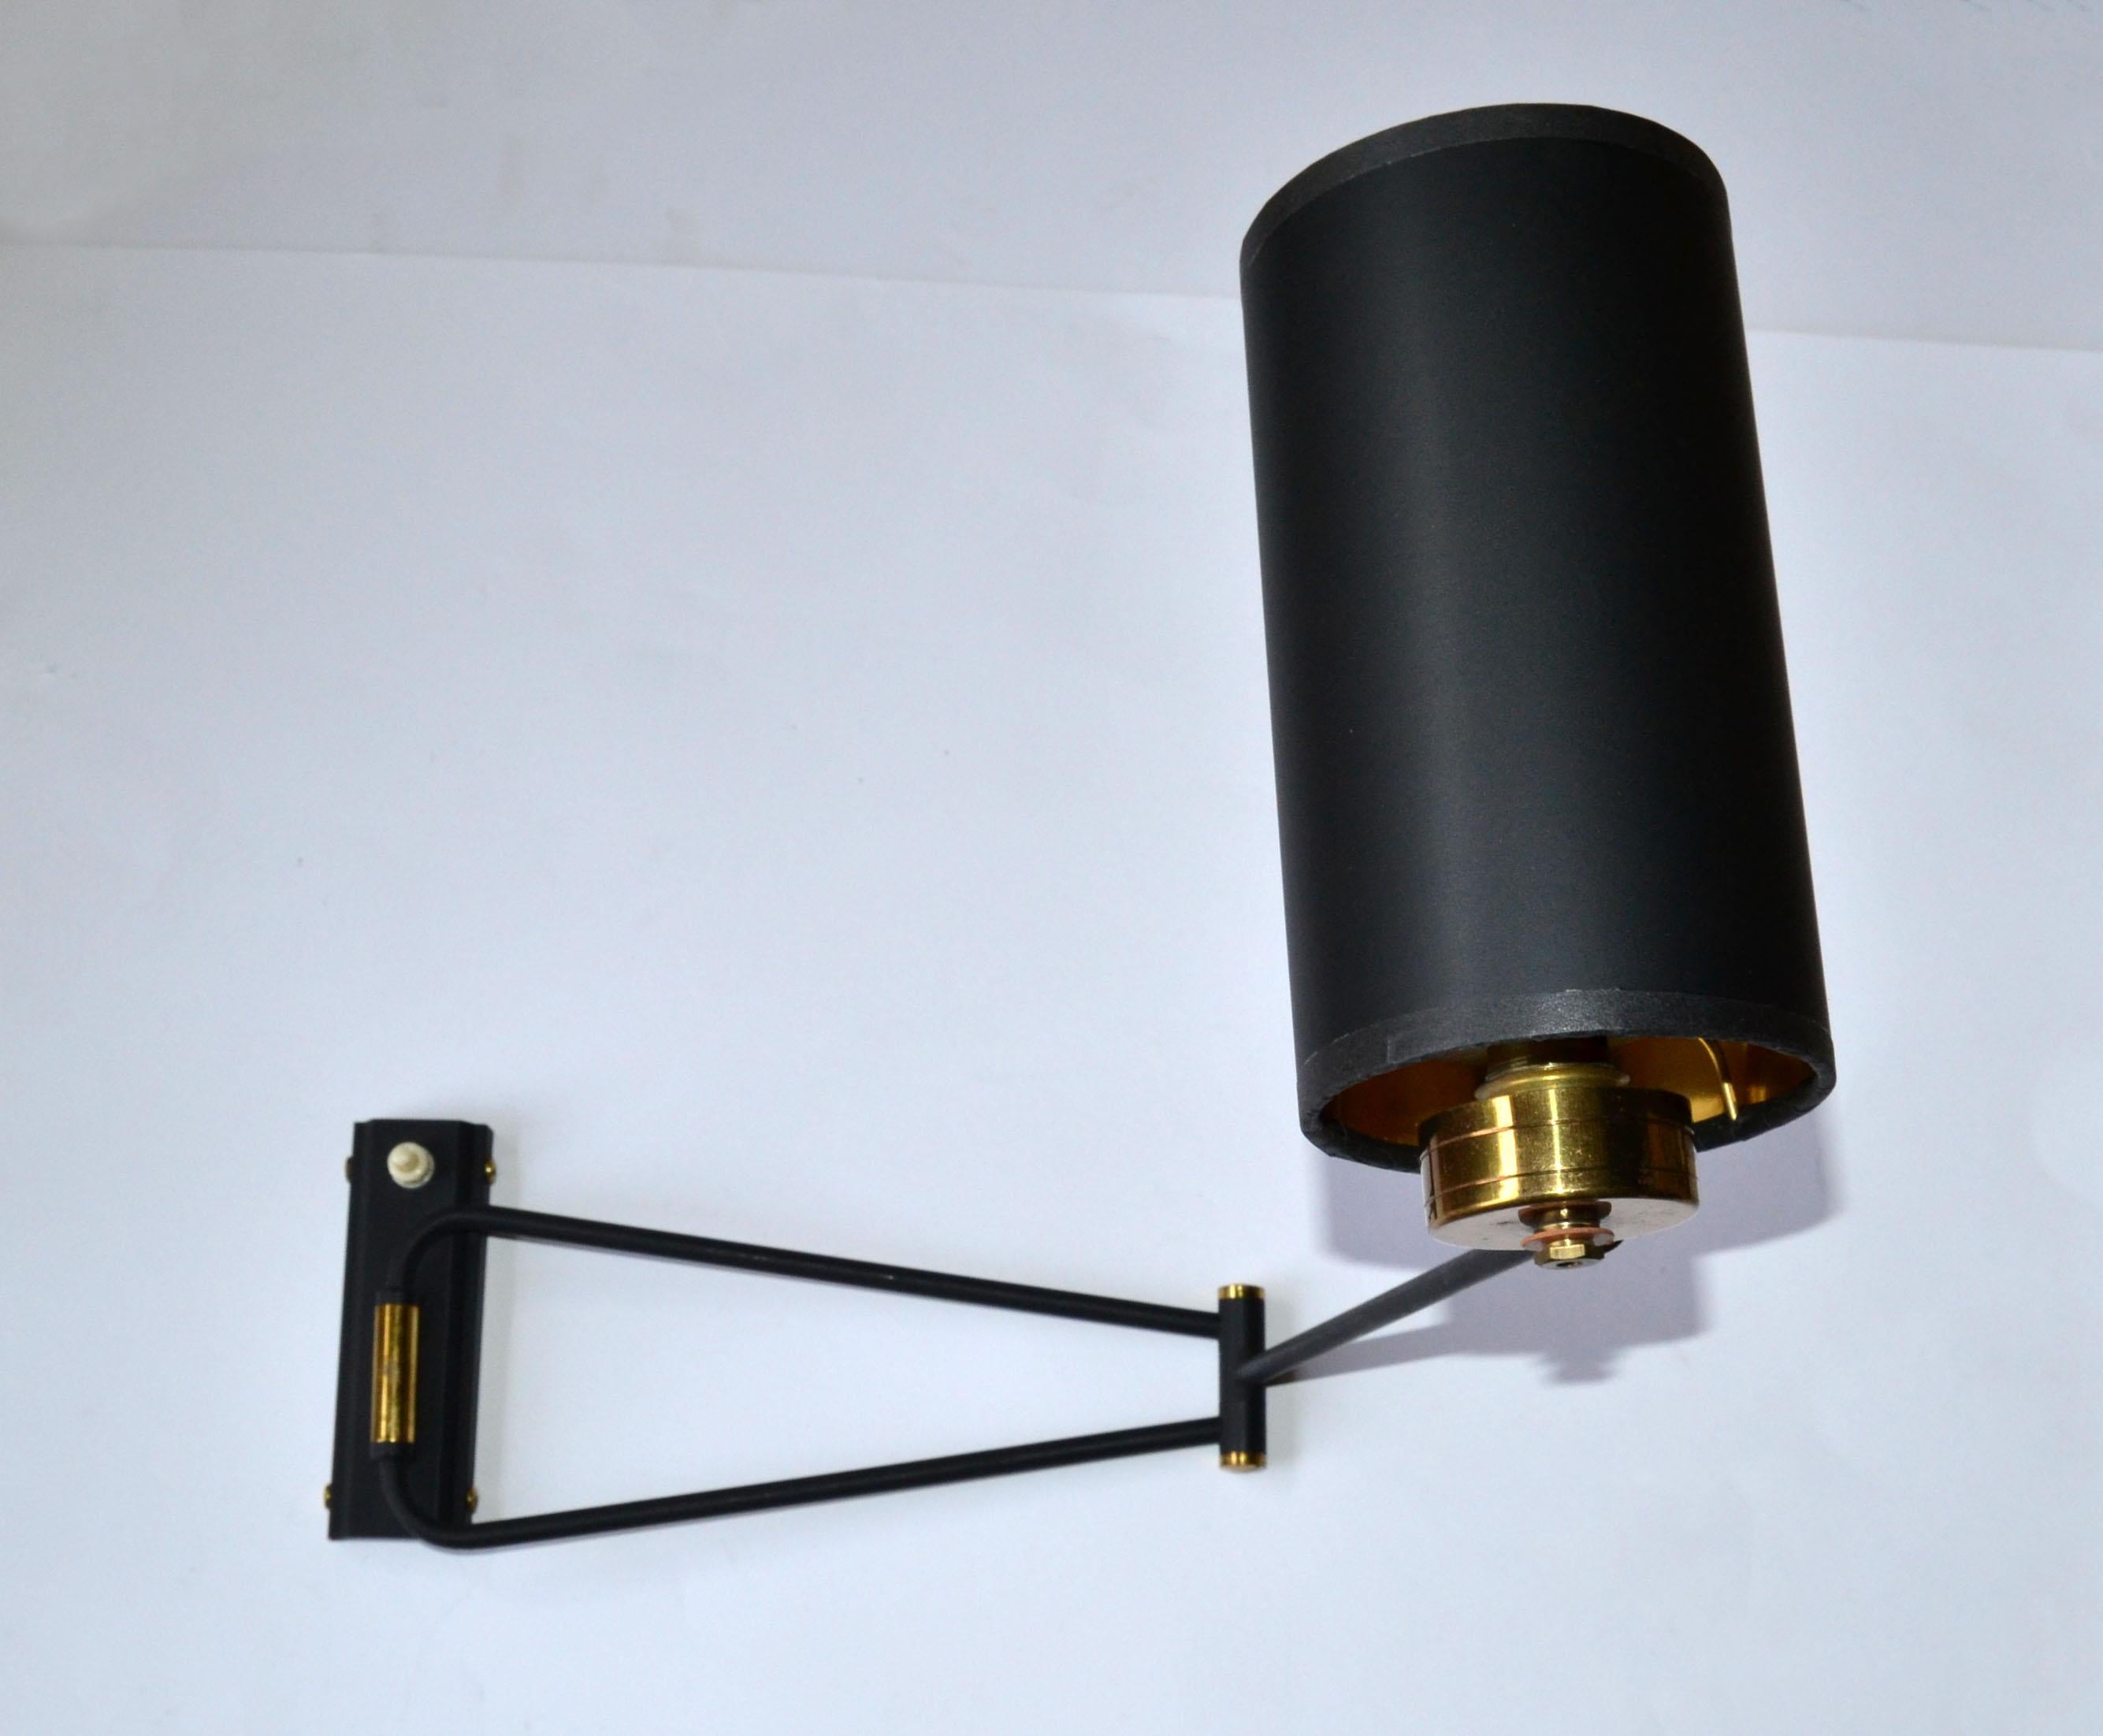 Superb Brass & black finished Steel double arm swing arm sconce with push on switch by Rene Mathieu, adjustable sconce made in France.
US rewired and in working condition, takes 1 light, 60 watts max bulb.
Custom back-plate available. 
Shades